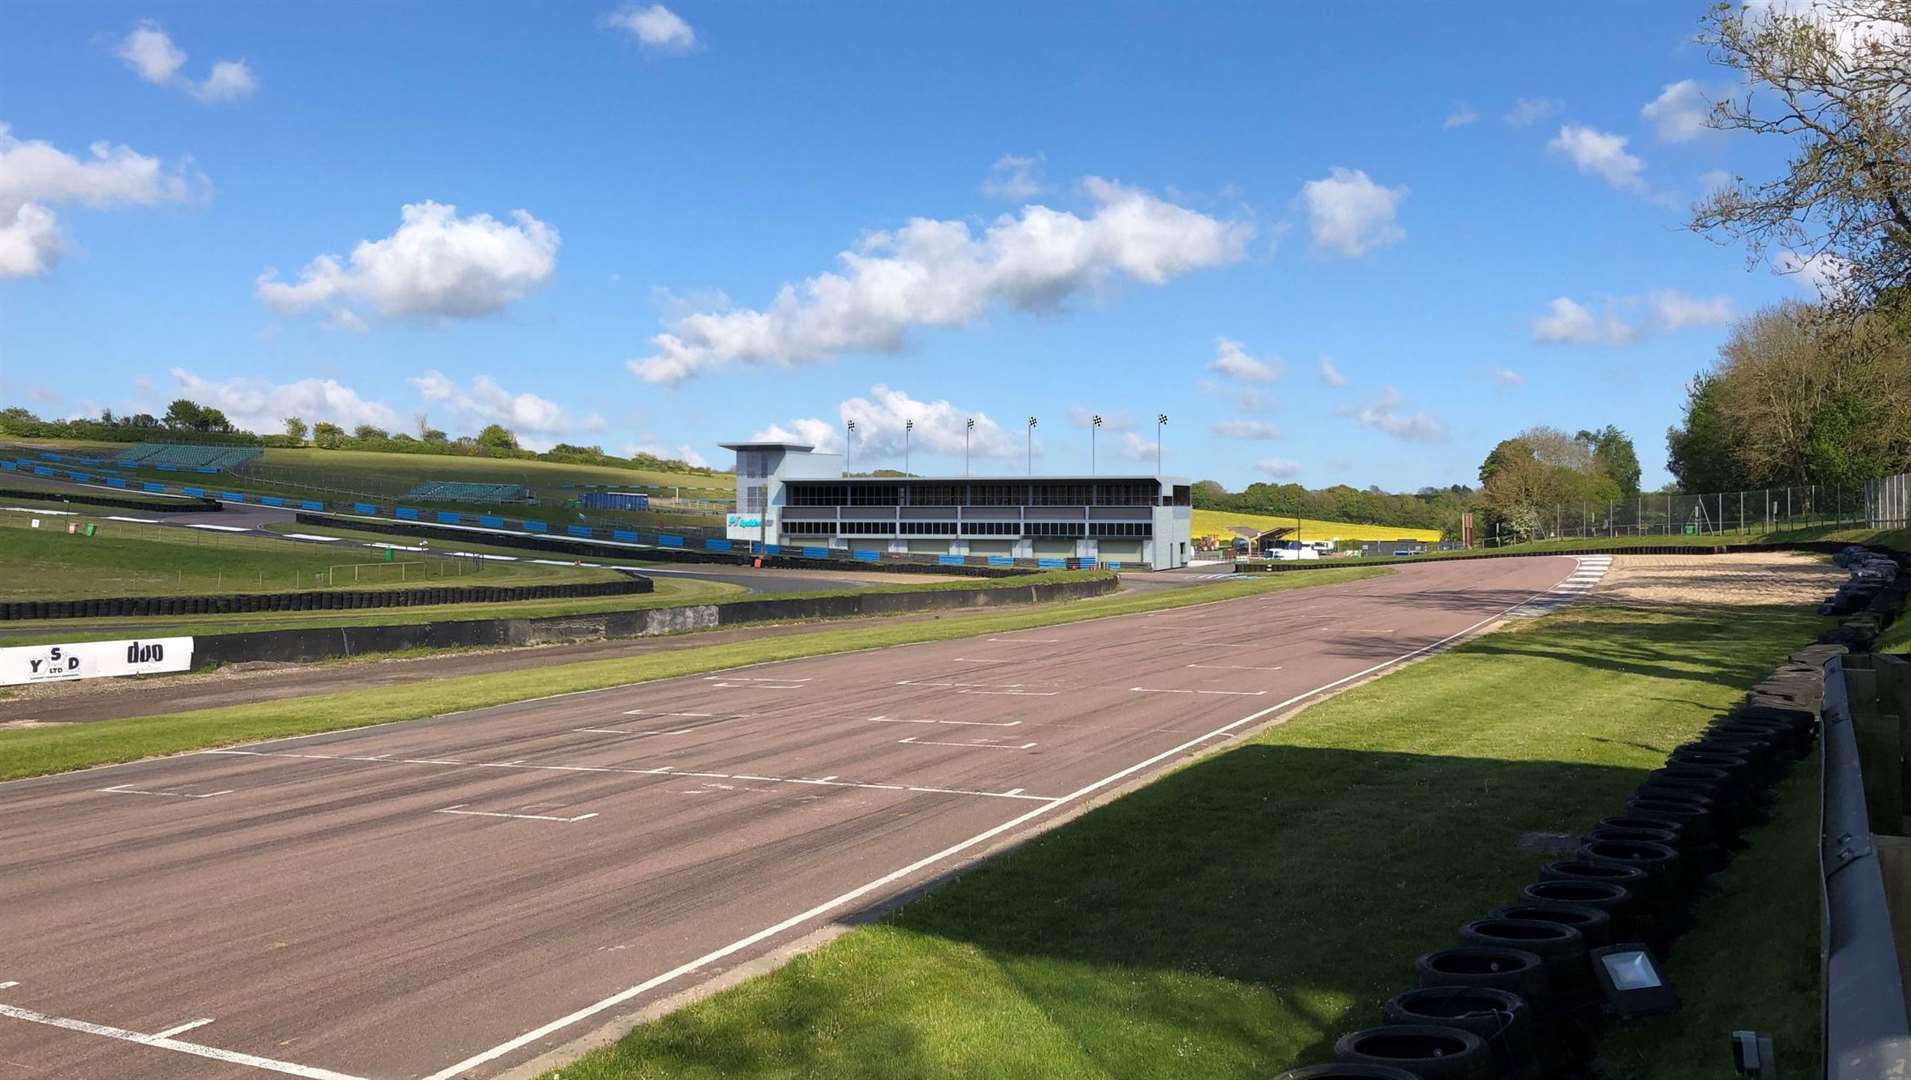 Work is set to start on the new paddock building in late 2021